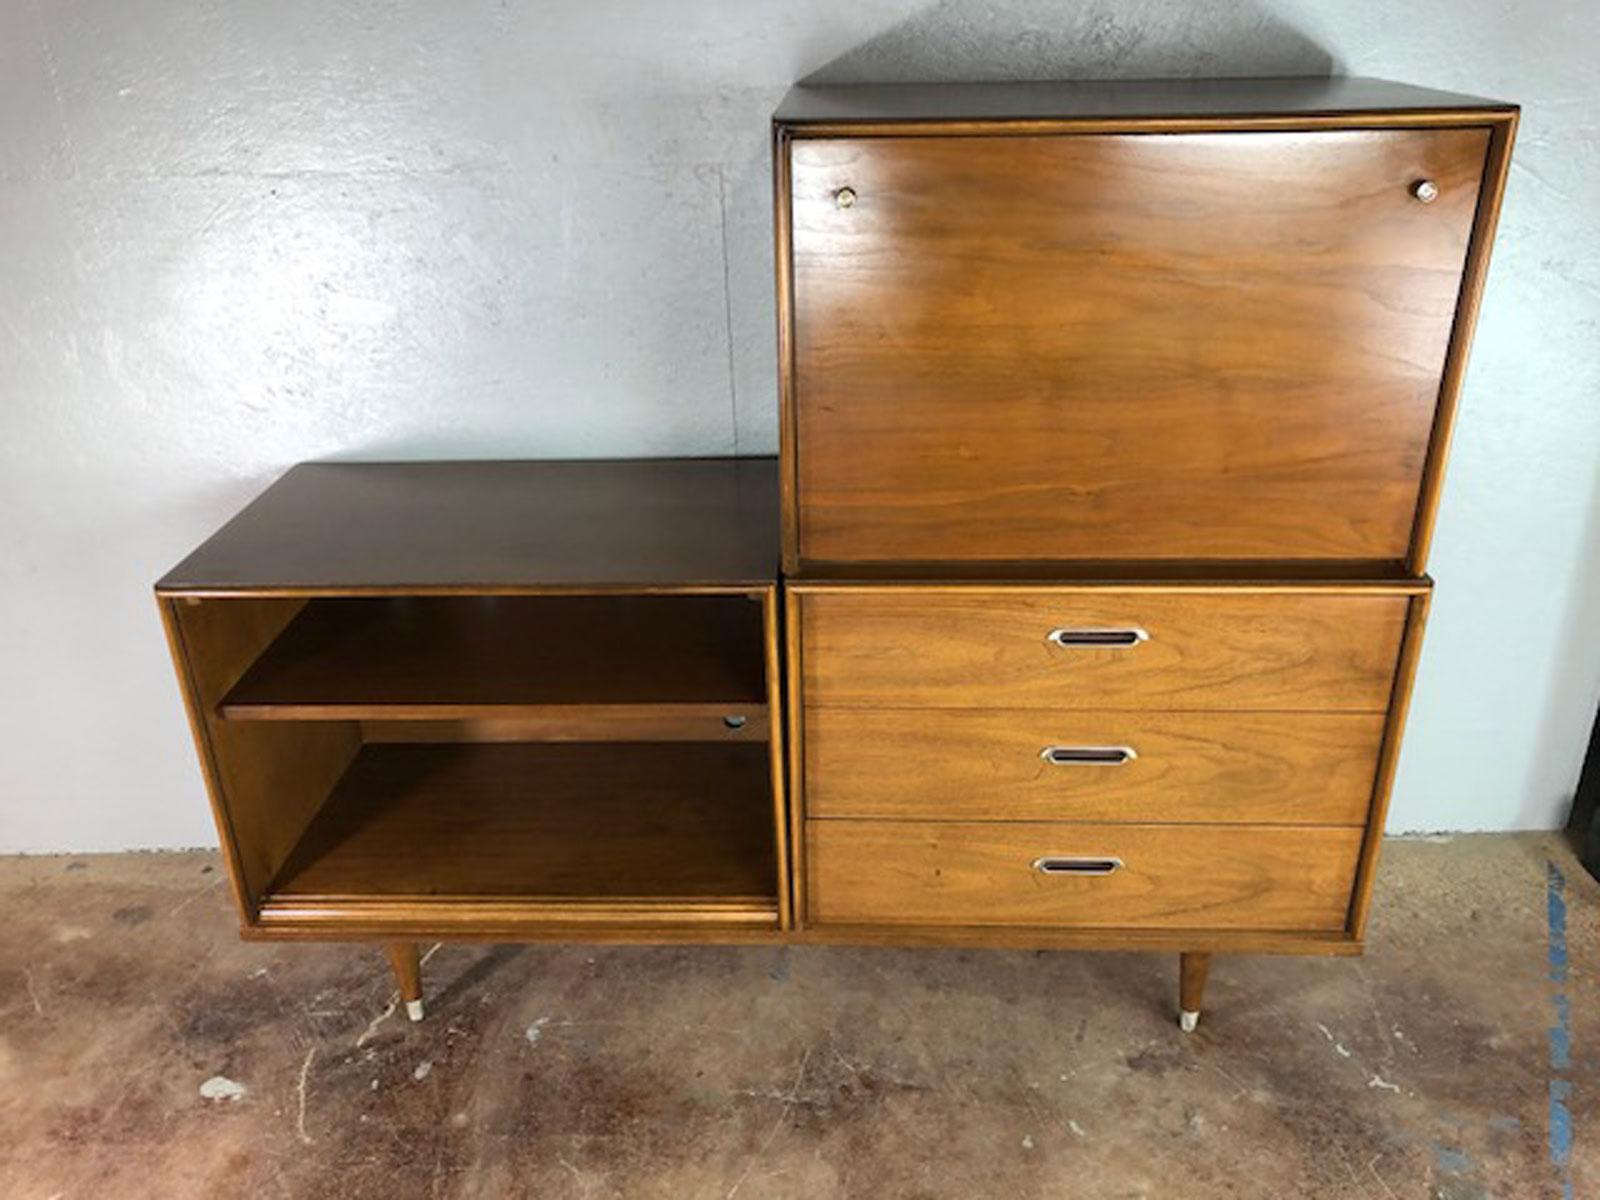 Unique modular hutch and desk unit by American of Martinsville. Original acquisition condition, circa 1960s. Light included in upper desk portion. Walnut. Sections of the hutch are movable and may be switched to alternate positions on the unit. Good